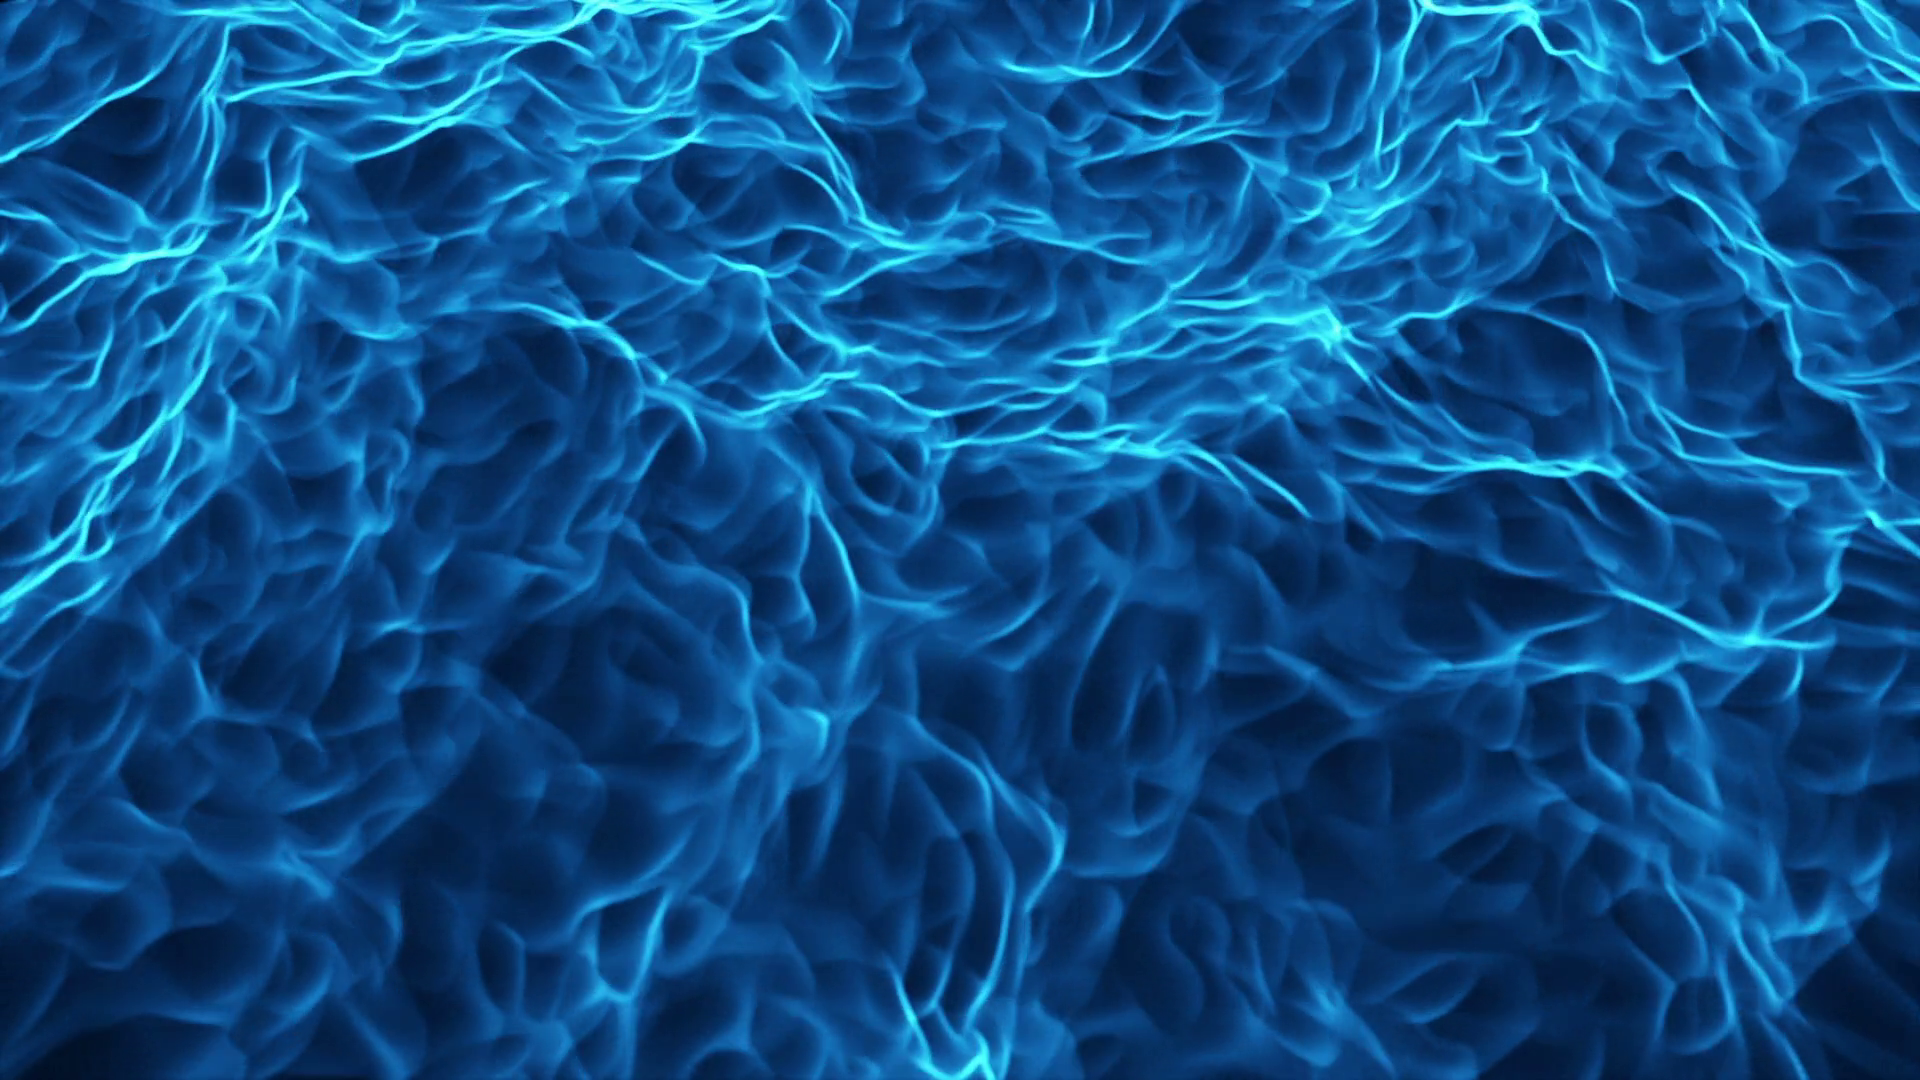 Stylized Abstract Ocean like Water Surface or Blue Flames